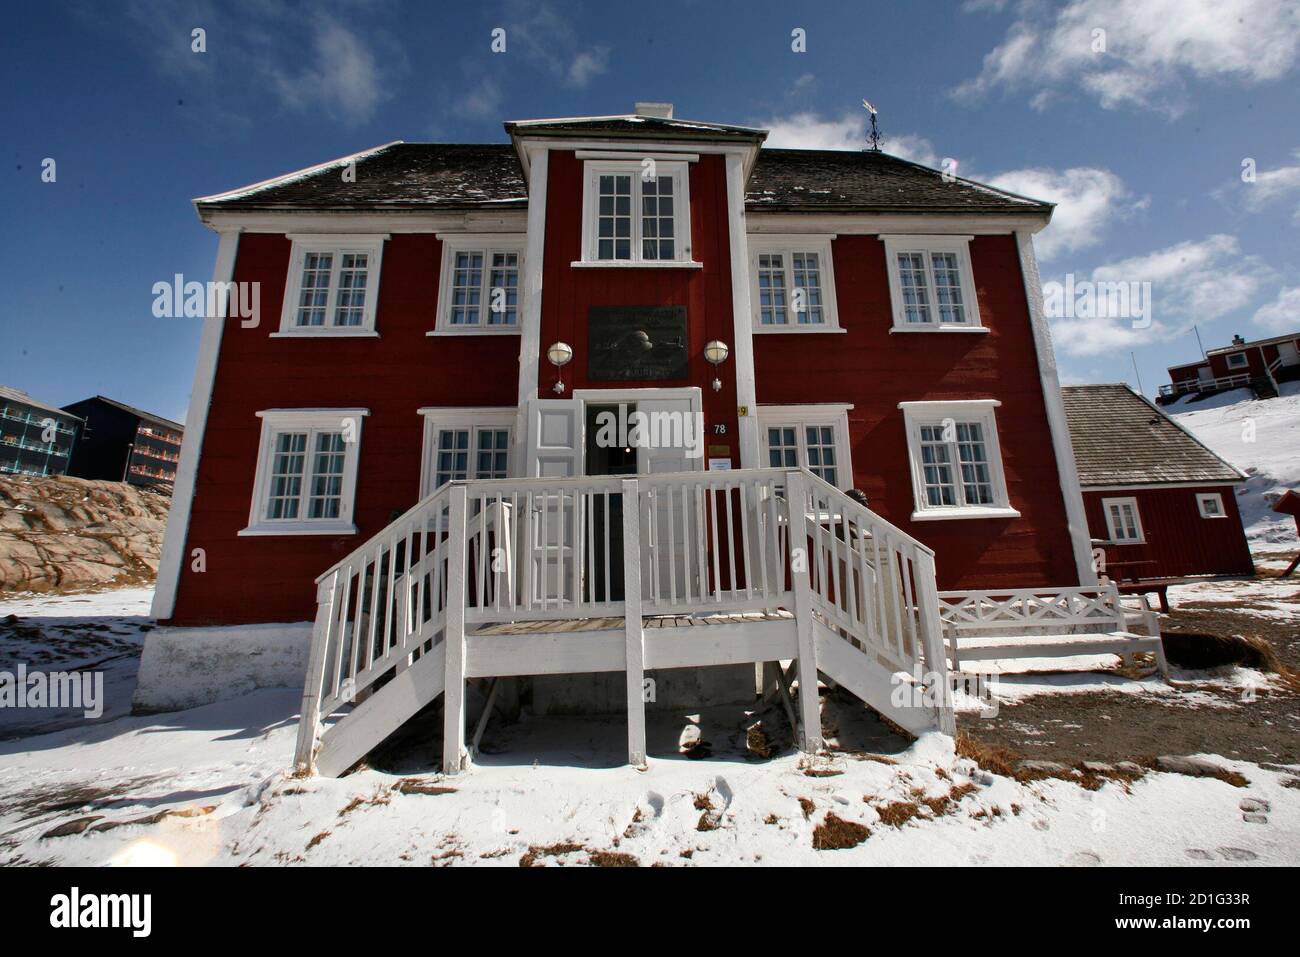 The house and museum of arctic explorer Knud Rasmussen stands near the center of Ilulissat as seen in this photo taken May 20, 2007. REUTERS/Bob Strong (GREENLAND) Stock Photo